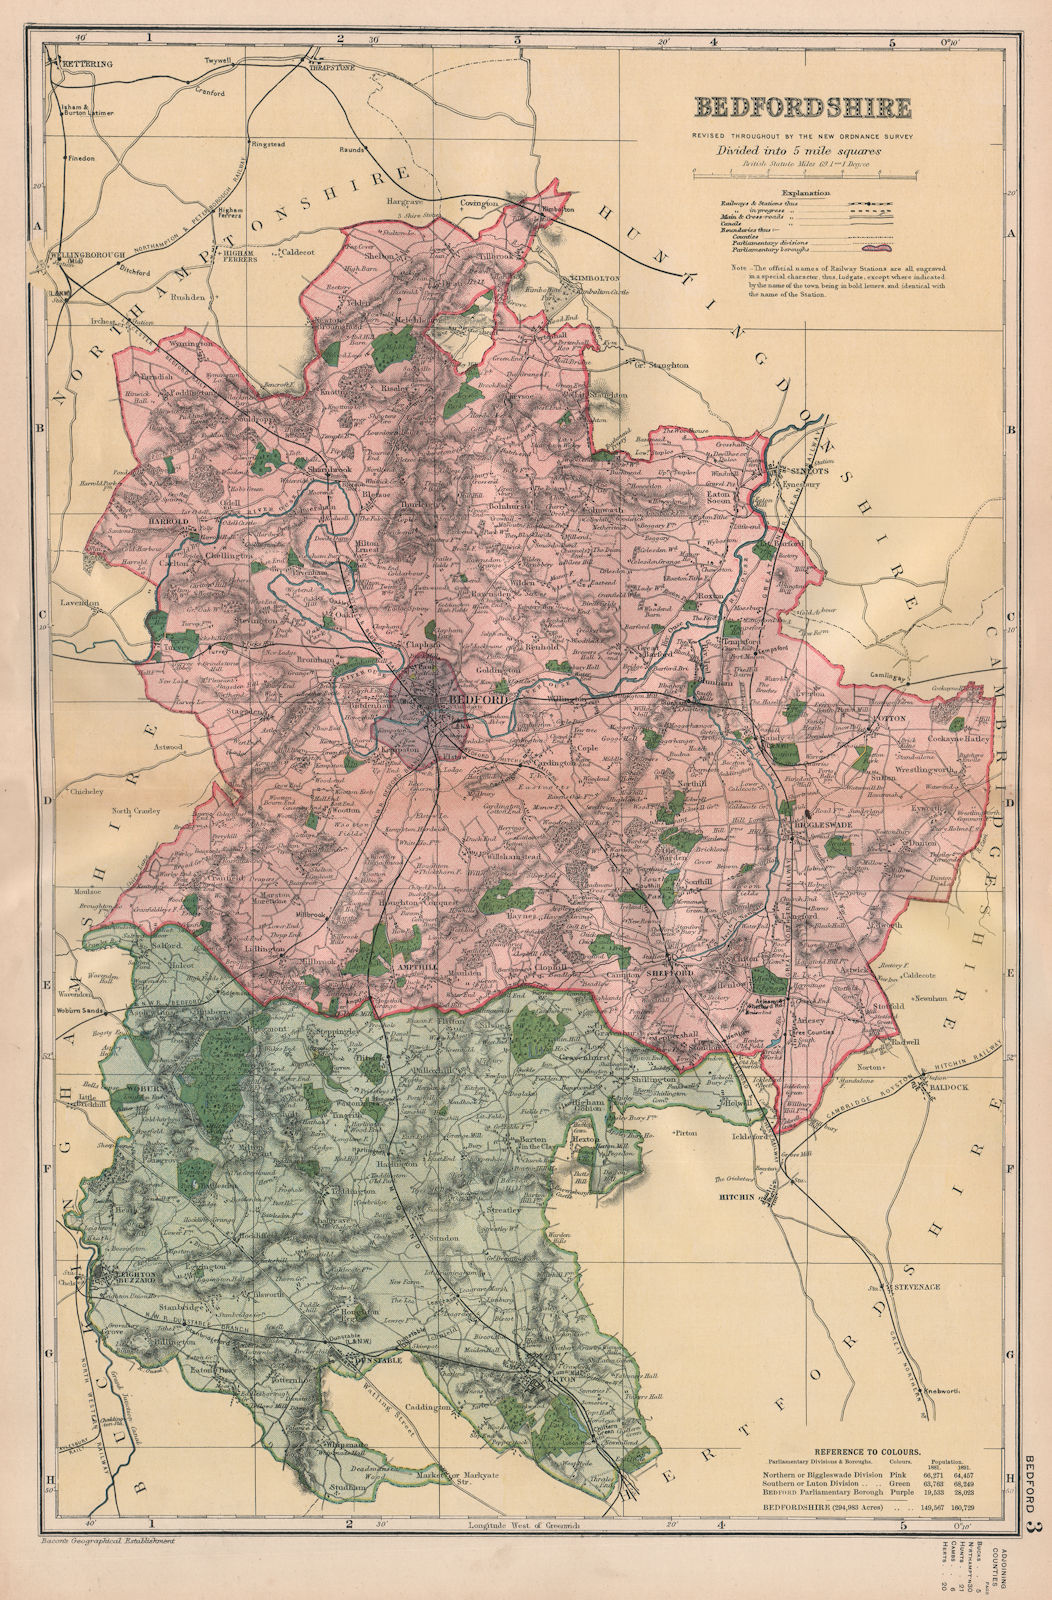 BEDFORDSHIRE. Showing Parliamentary divisions, boroughs & parks. BACON 1896 map